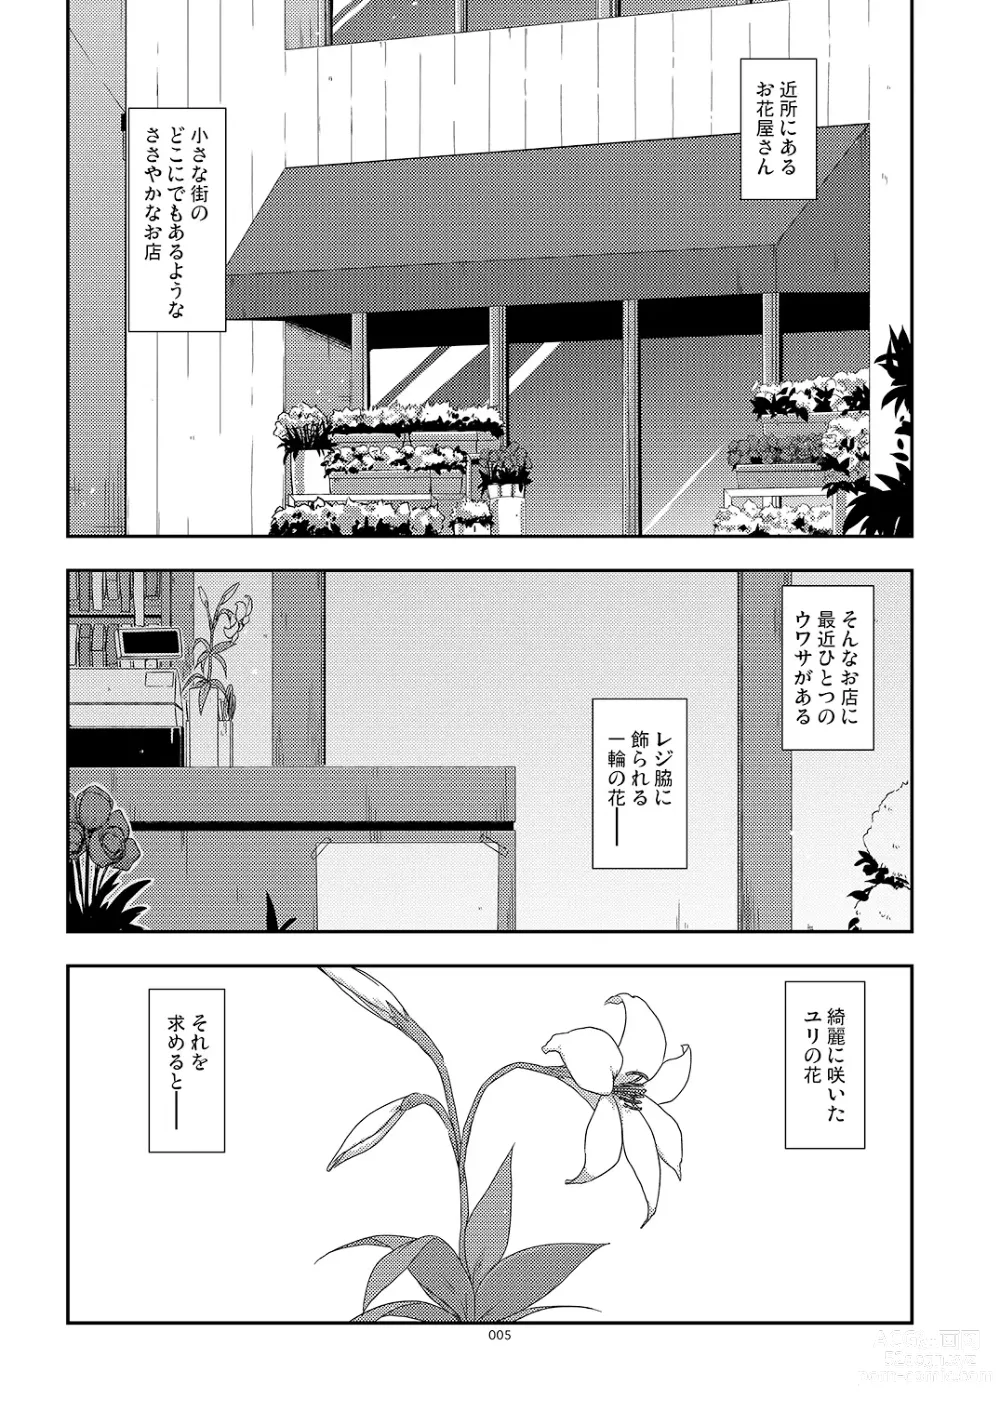 Page 5 of doujinshi Rouka Soushuuhen - Tinkered Flower Perfect Collection